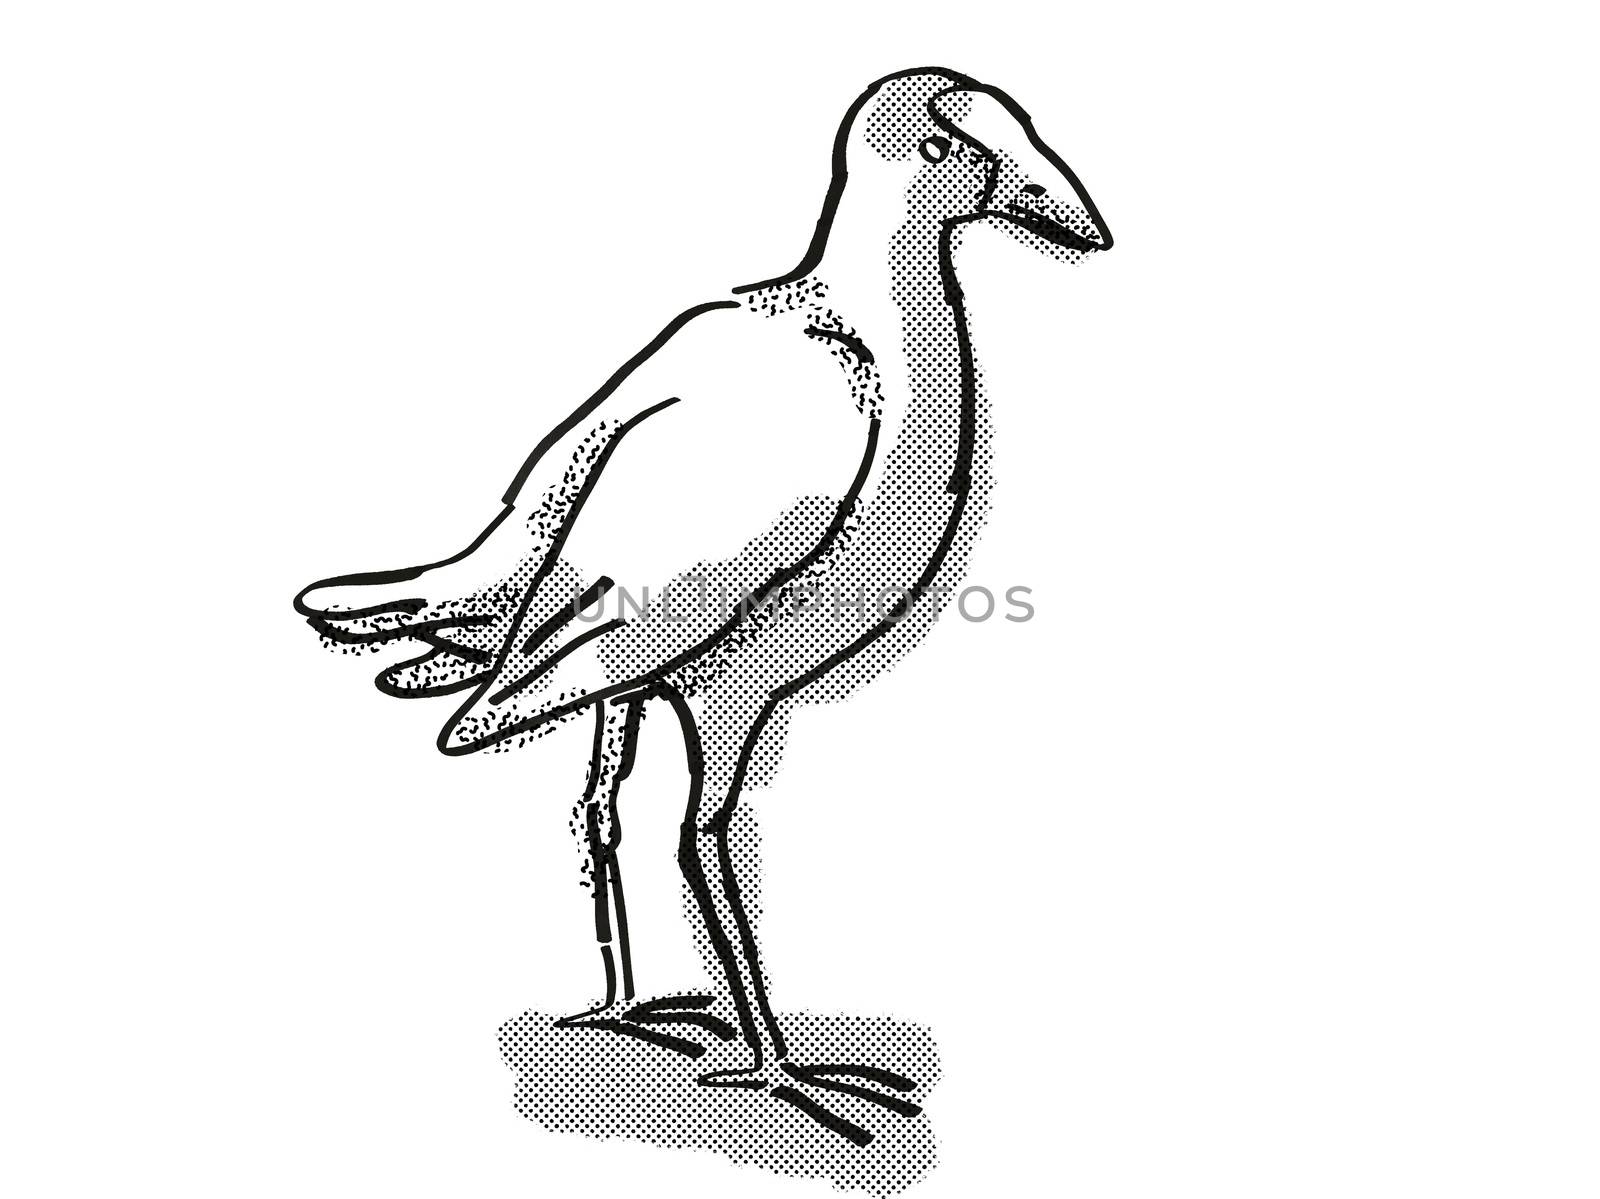 Retro cartoon style drawing of a pukeko or purple swamphen  , a New Zealand bird on isolated white background done in black and white